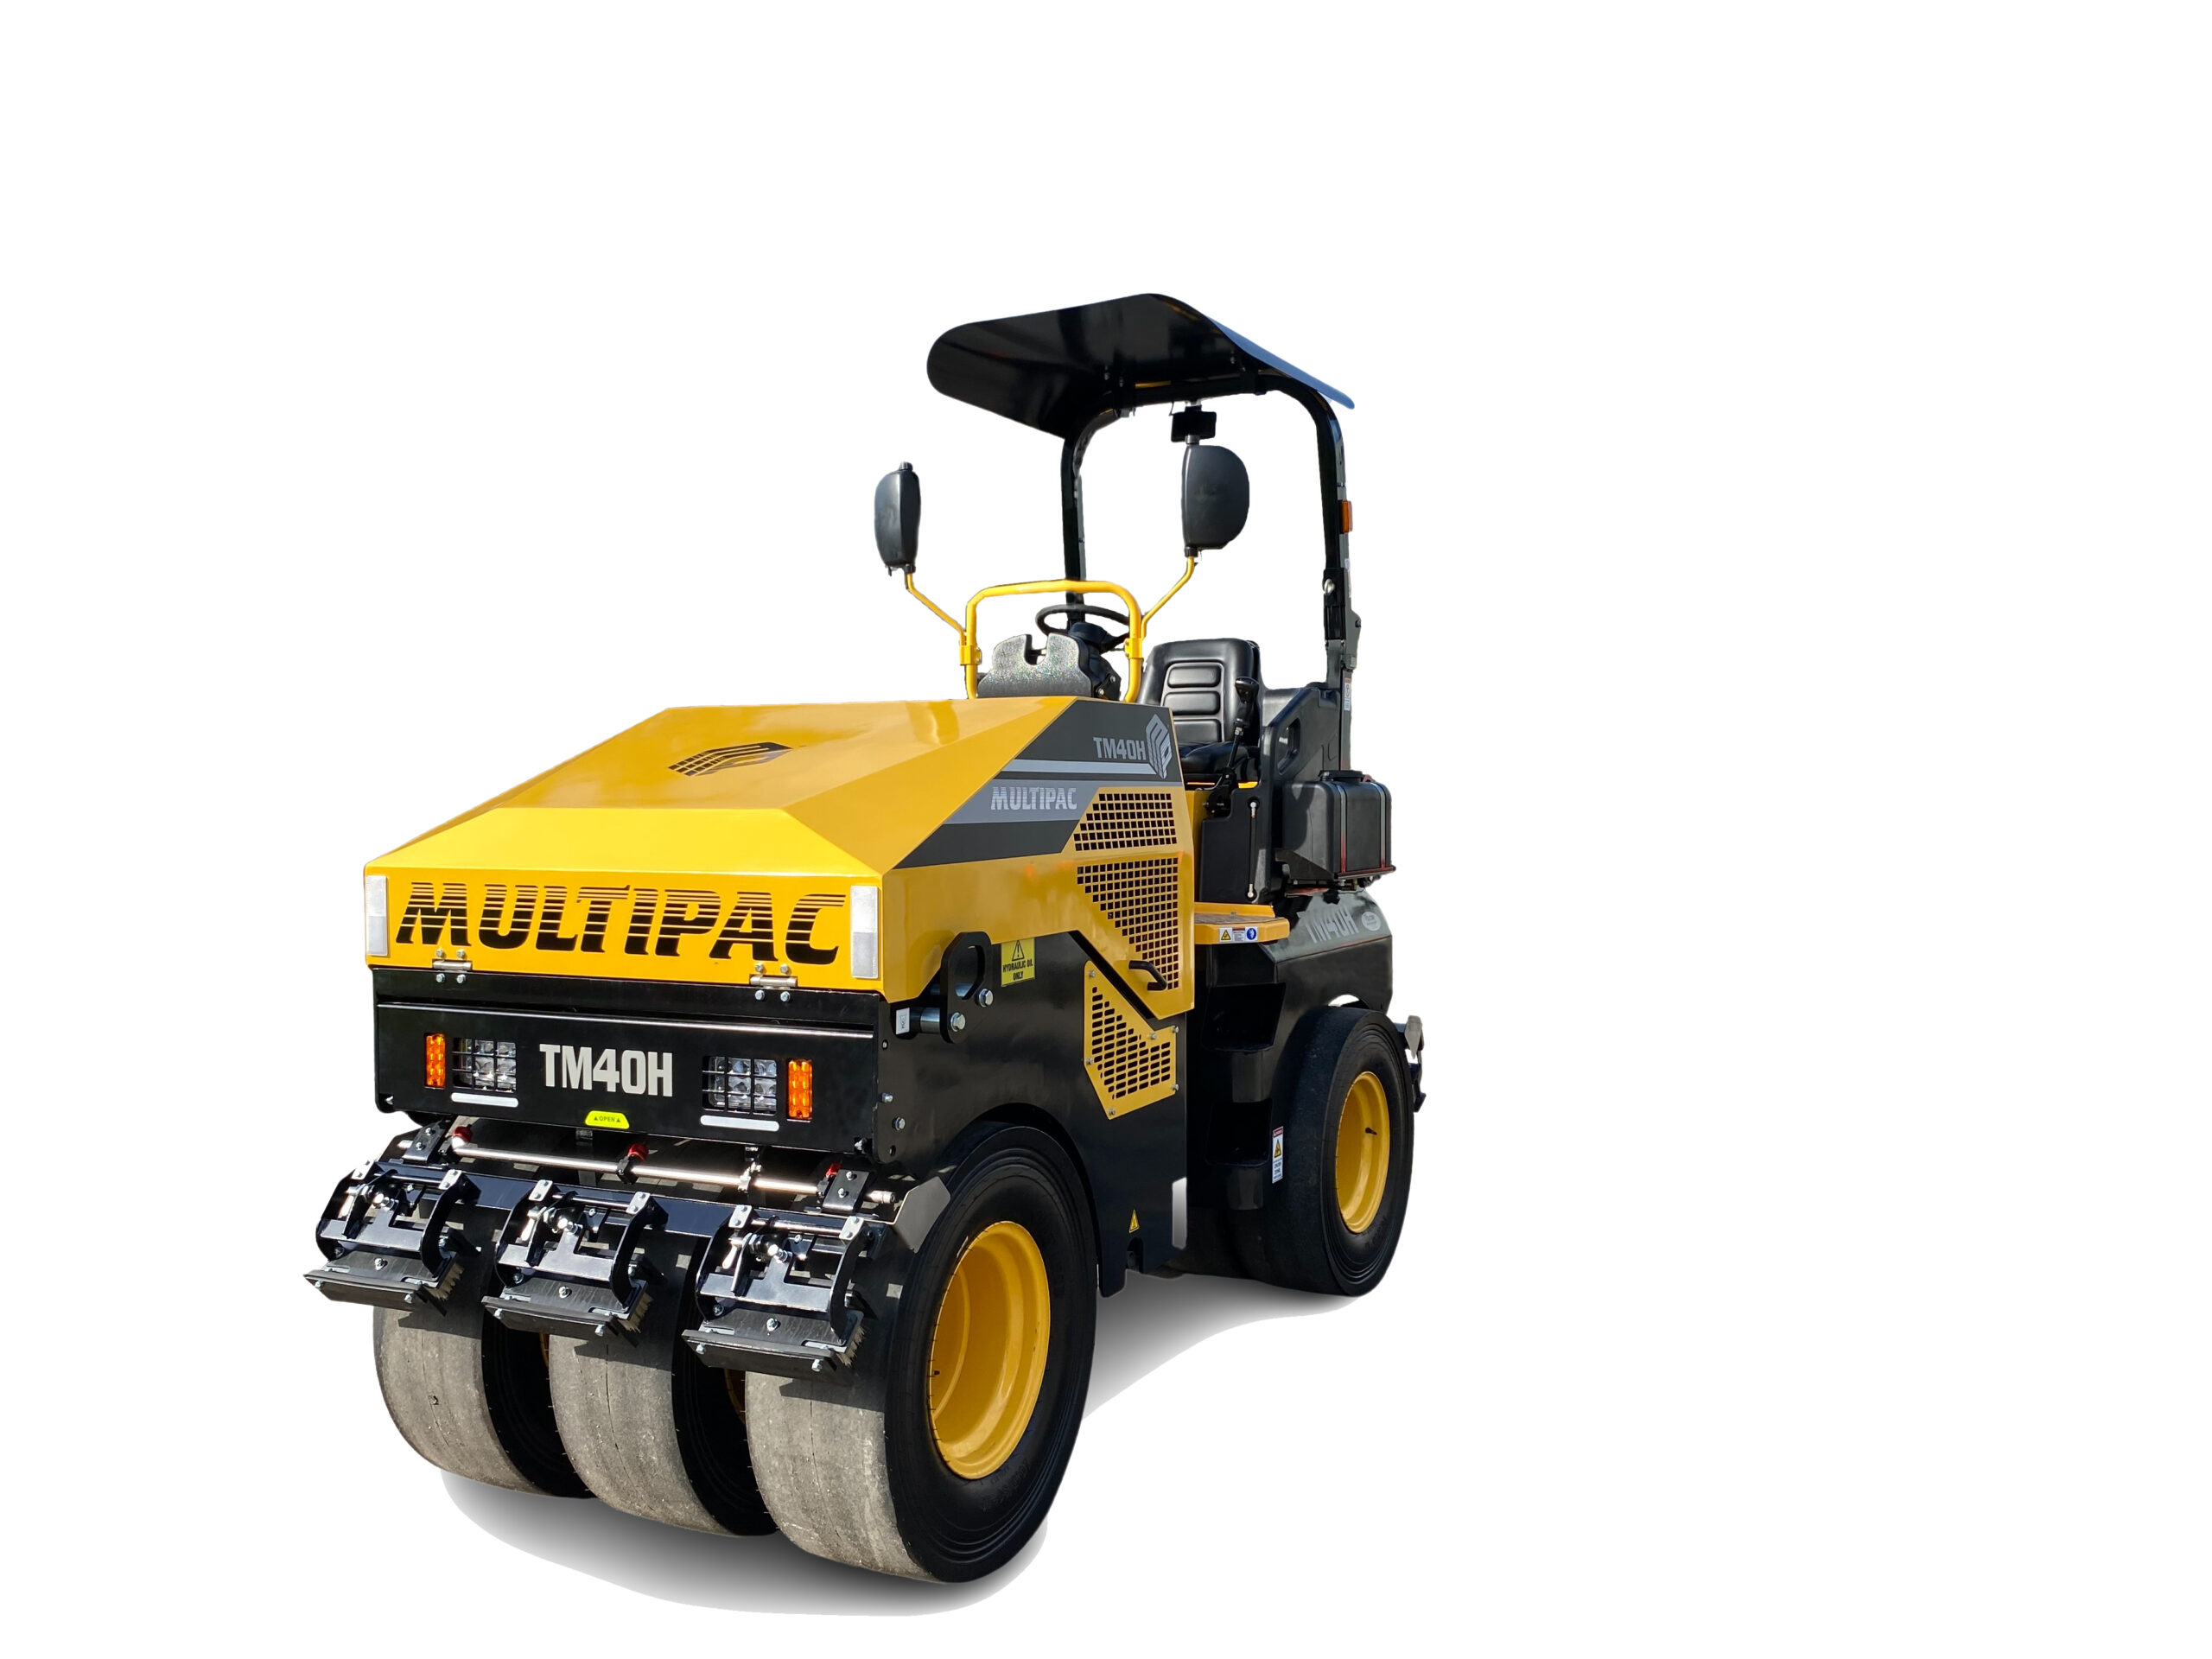 Multipac TM40H Multi Tyre Roller front-side